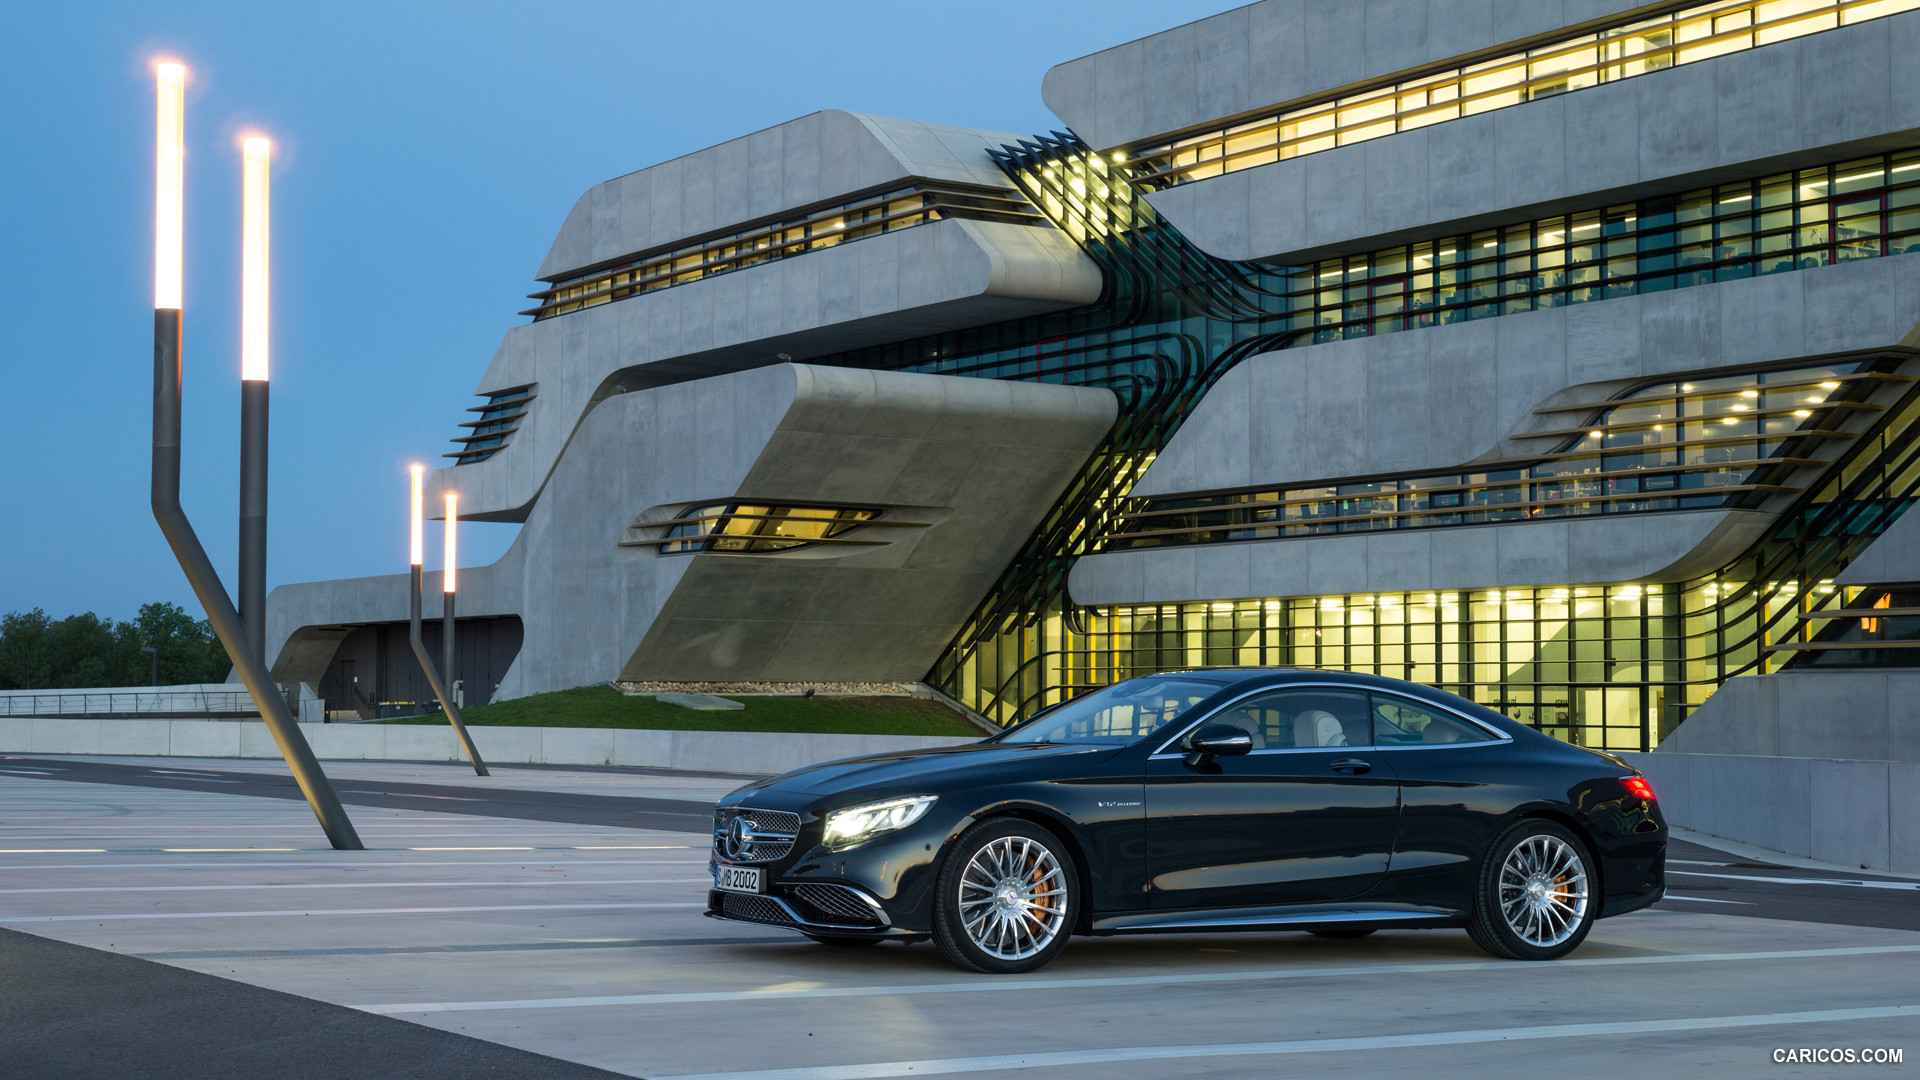 2015 Mercedes-Benz S65 AMG Coupe (Anthracite Blue) - Side, #14 of 101